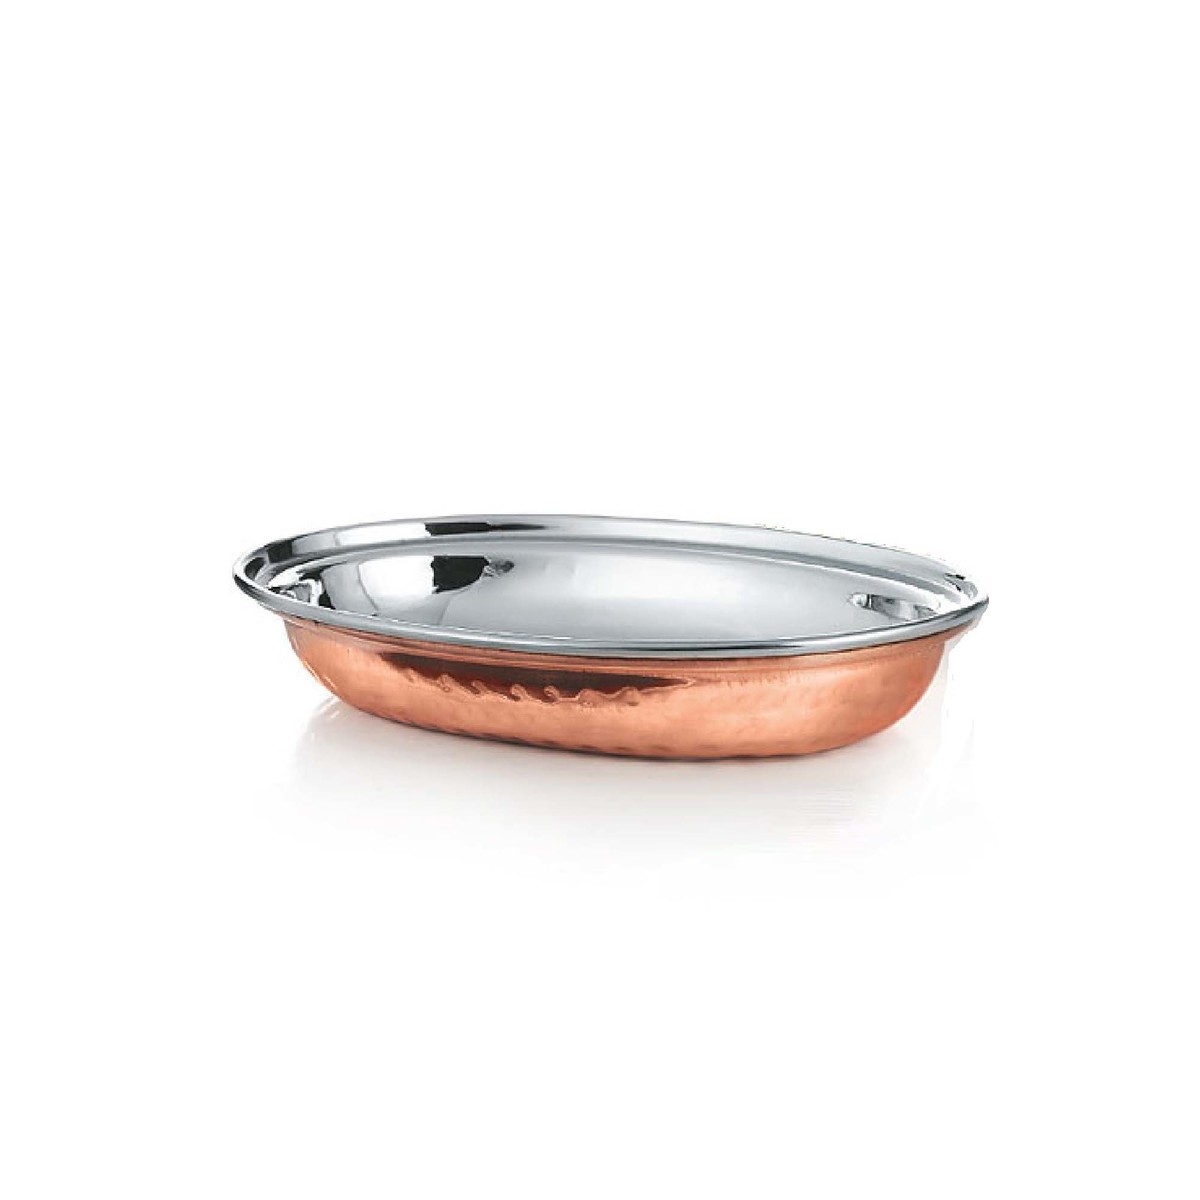 Chefline Double Wall Copper Oval Curry Dish 18.5cm